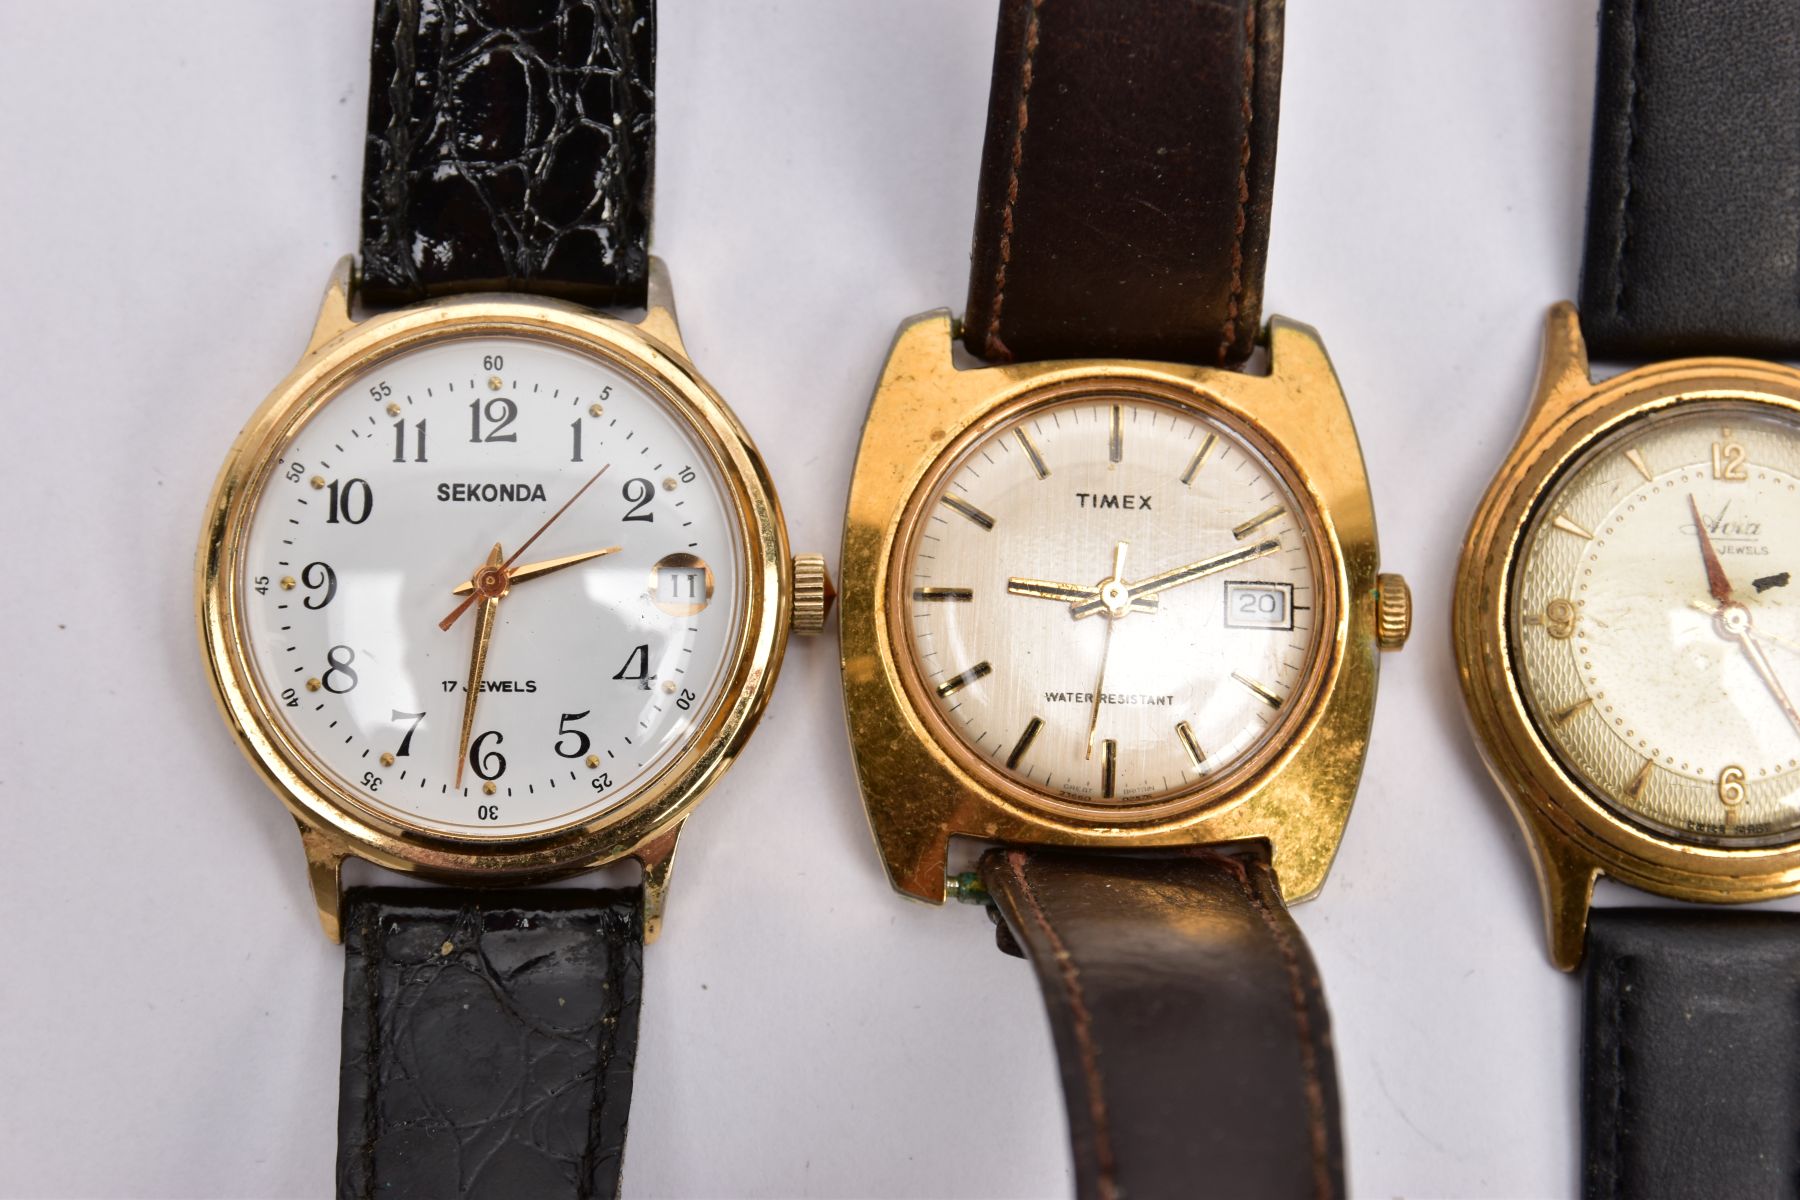 THREE GENTLEMAN'S WATCHES AND A WATCH HEAD, to include Sekonda, Avia, Timex and a Corvette watch - Image 2 of 4